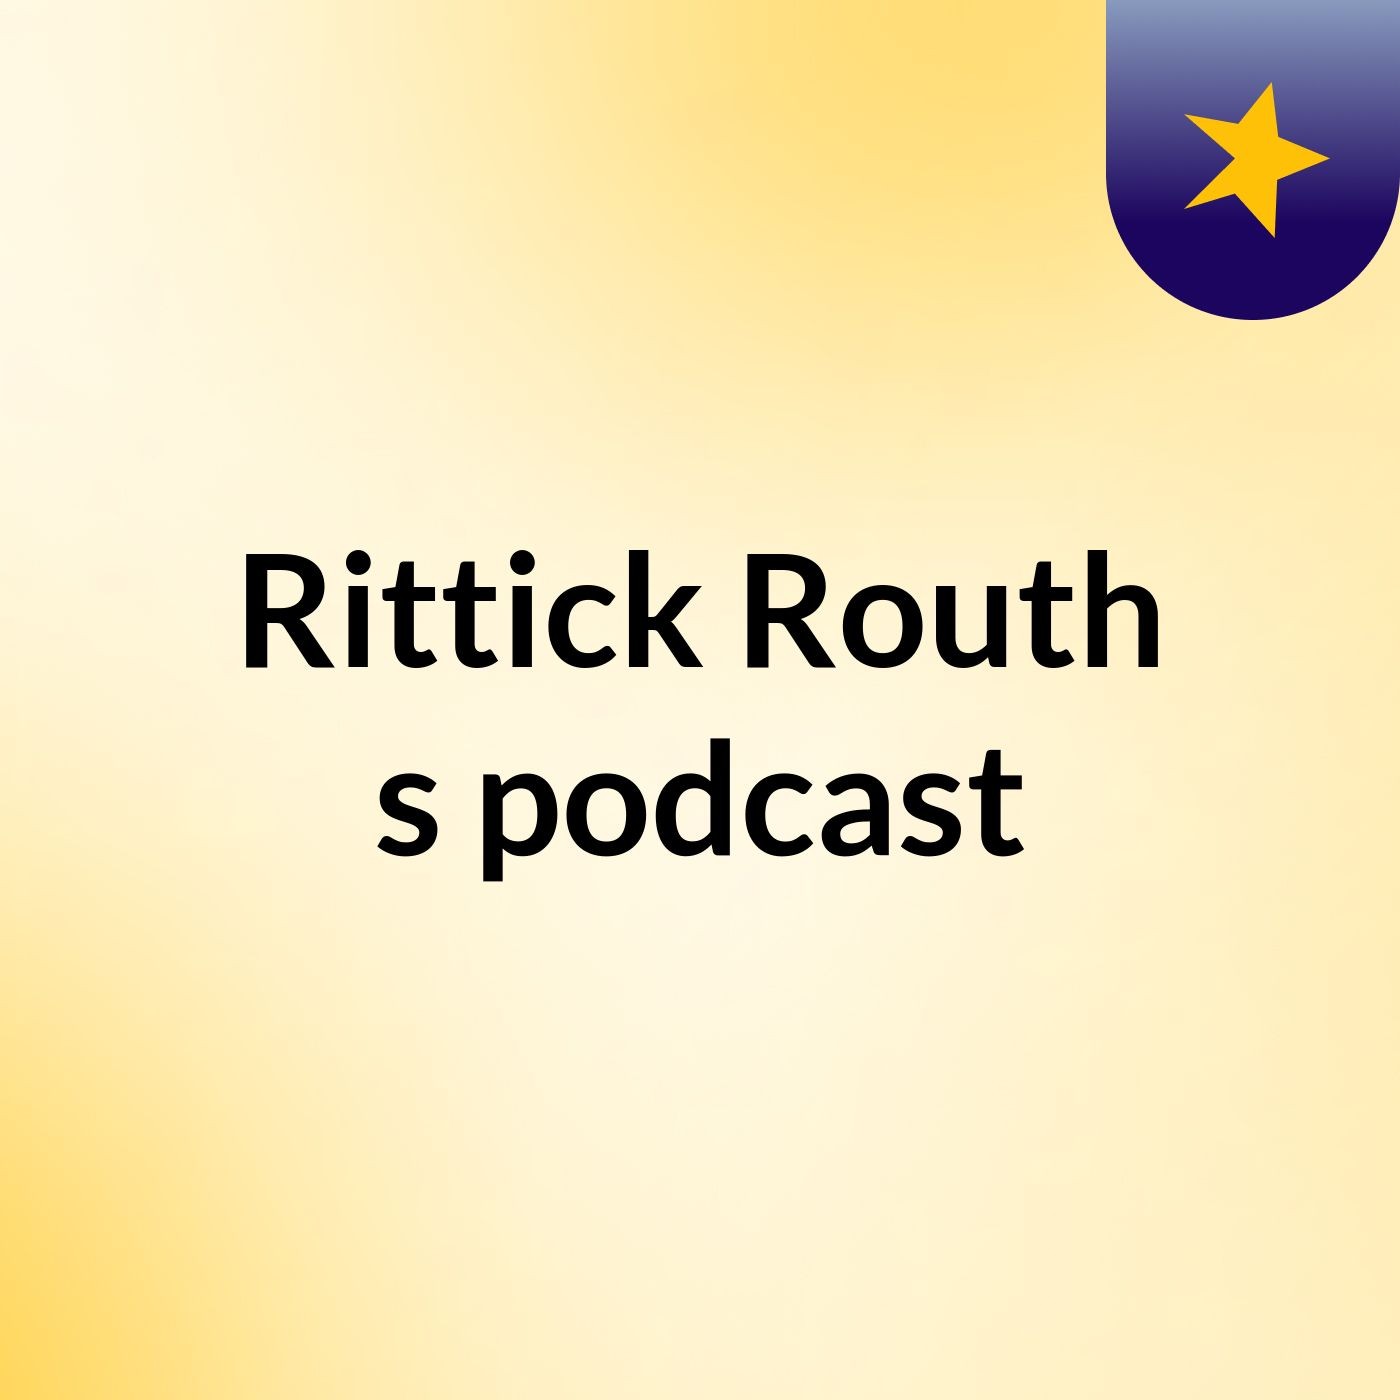 Rittick Routh's podcast